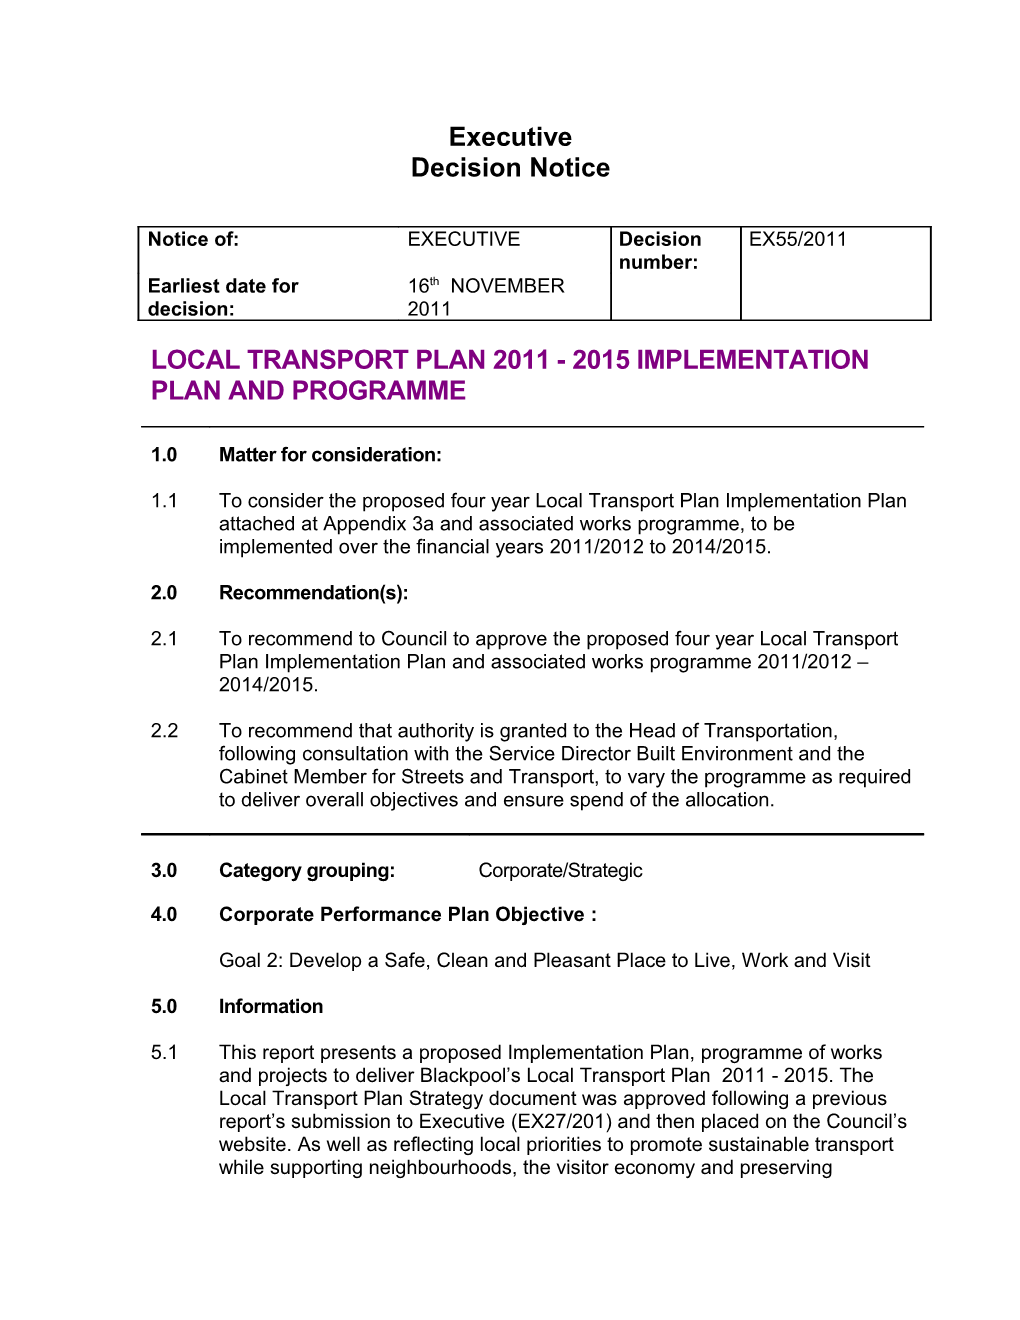 Local Transport Plan 2011 - 2015 Implementation Plan and Programme